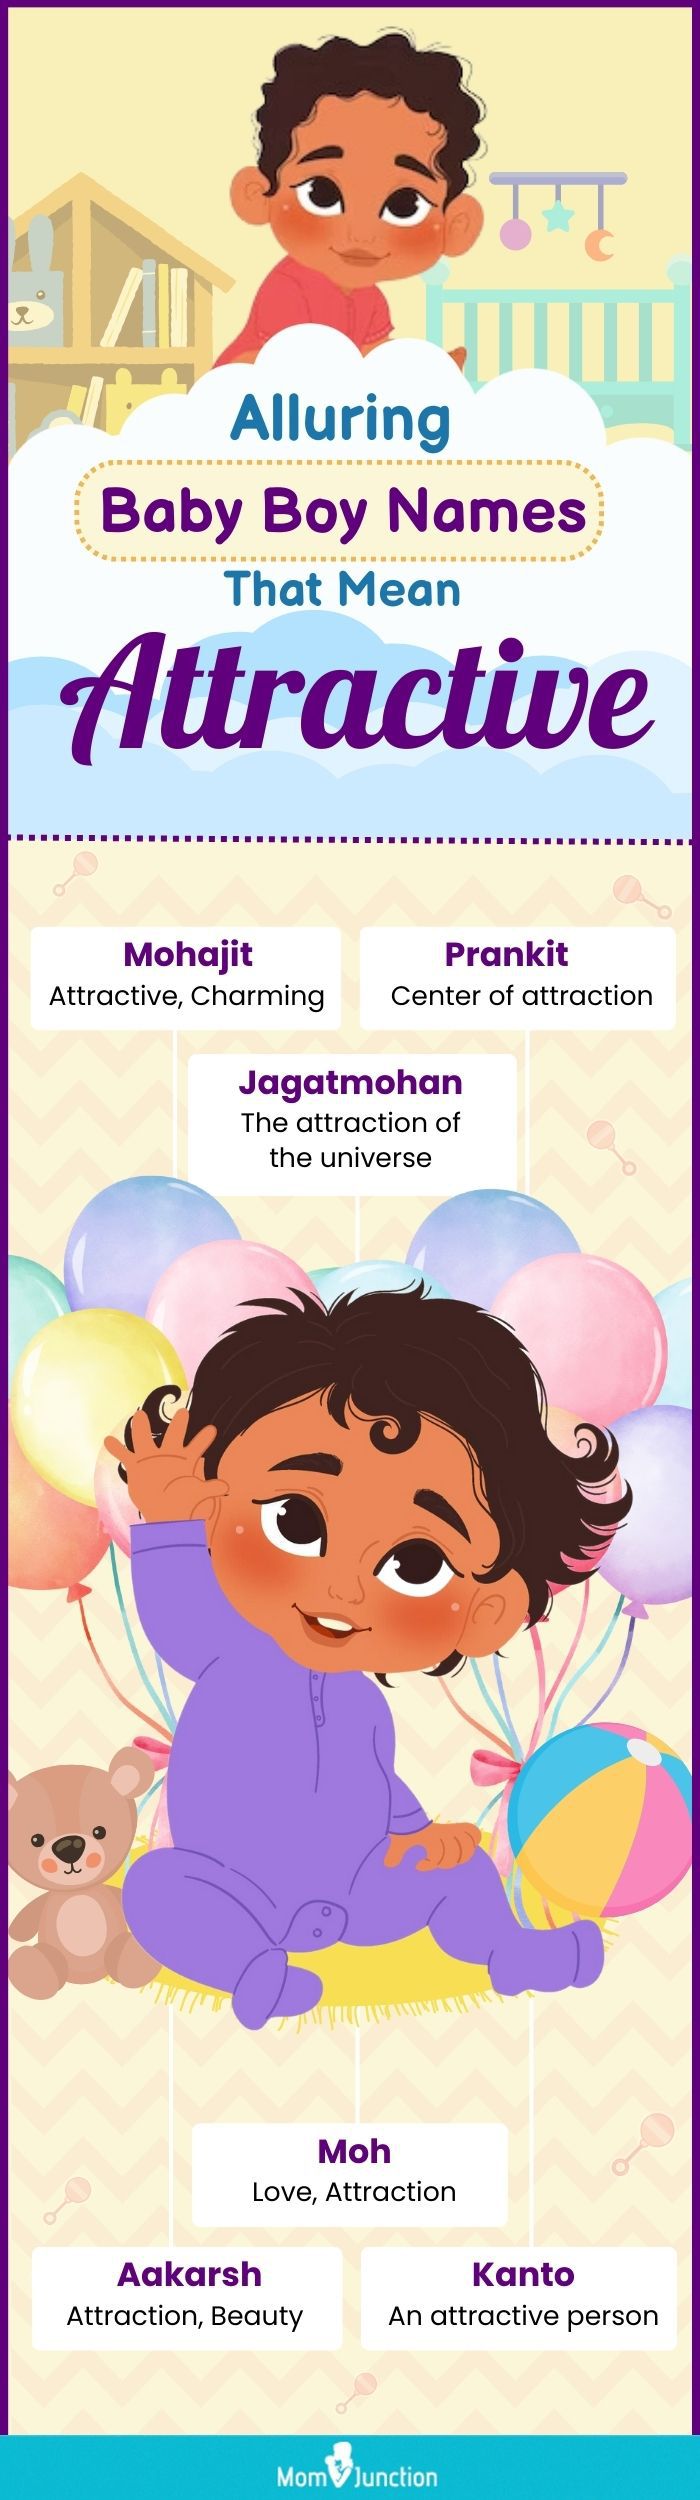 alluring baby boy names that mean attractive (infographic)